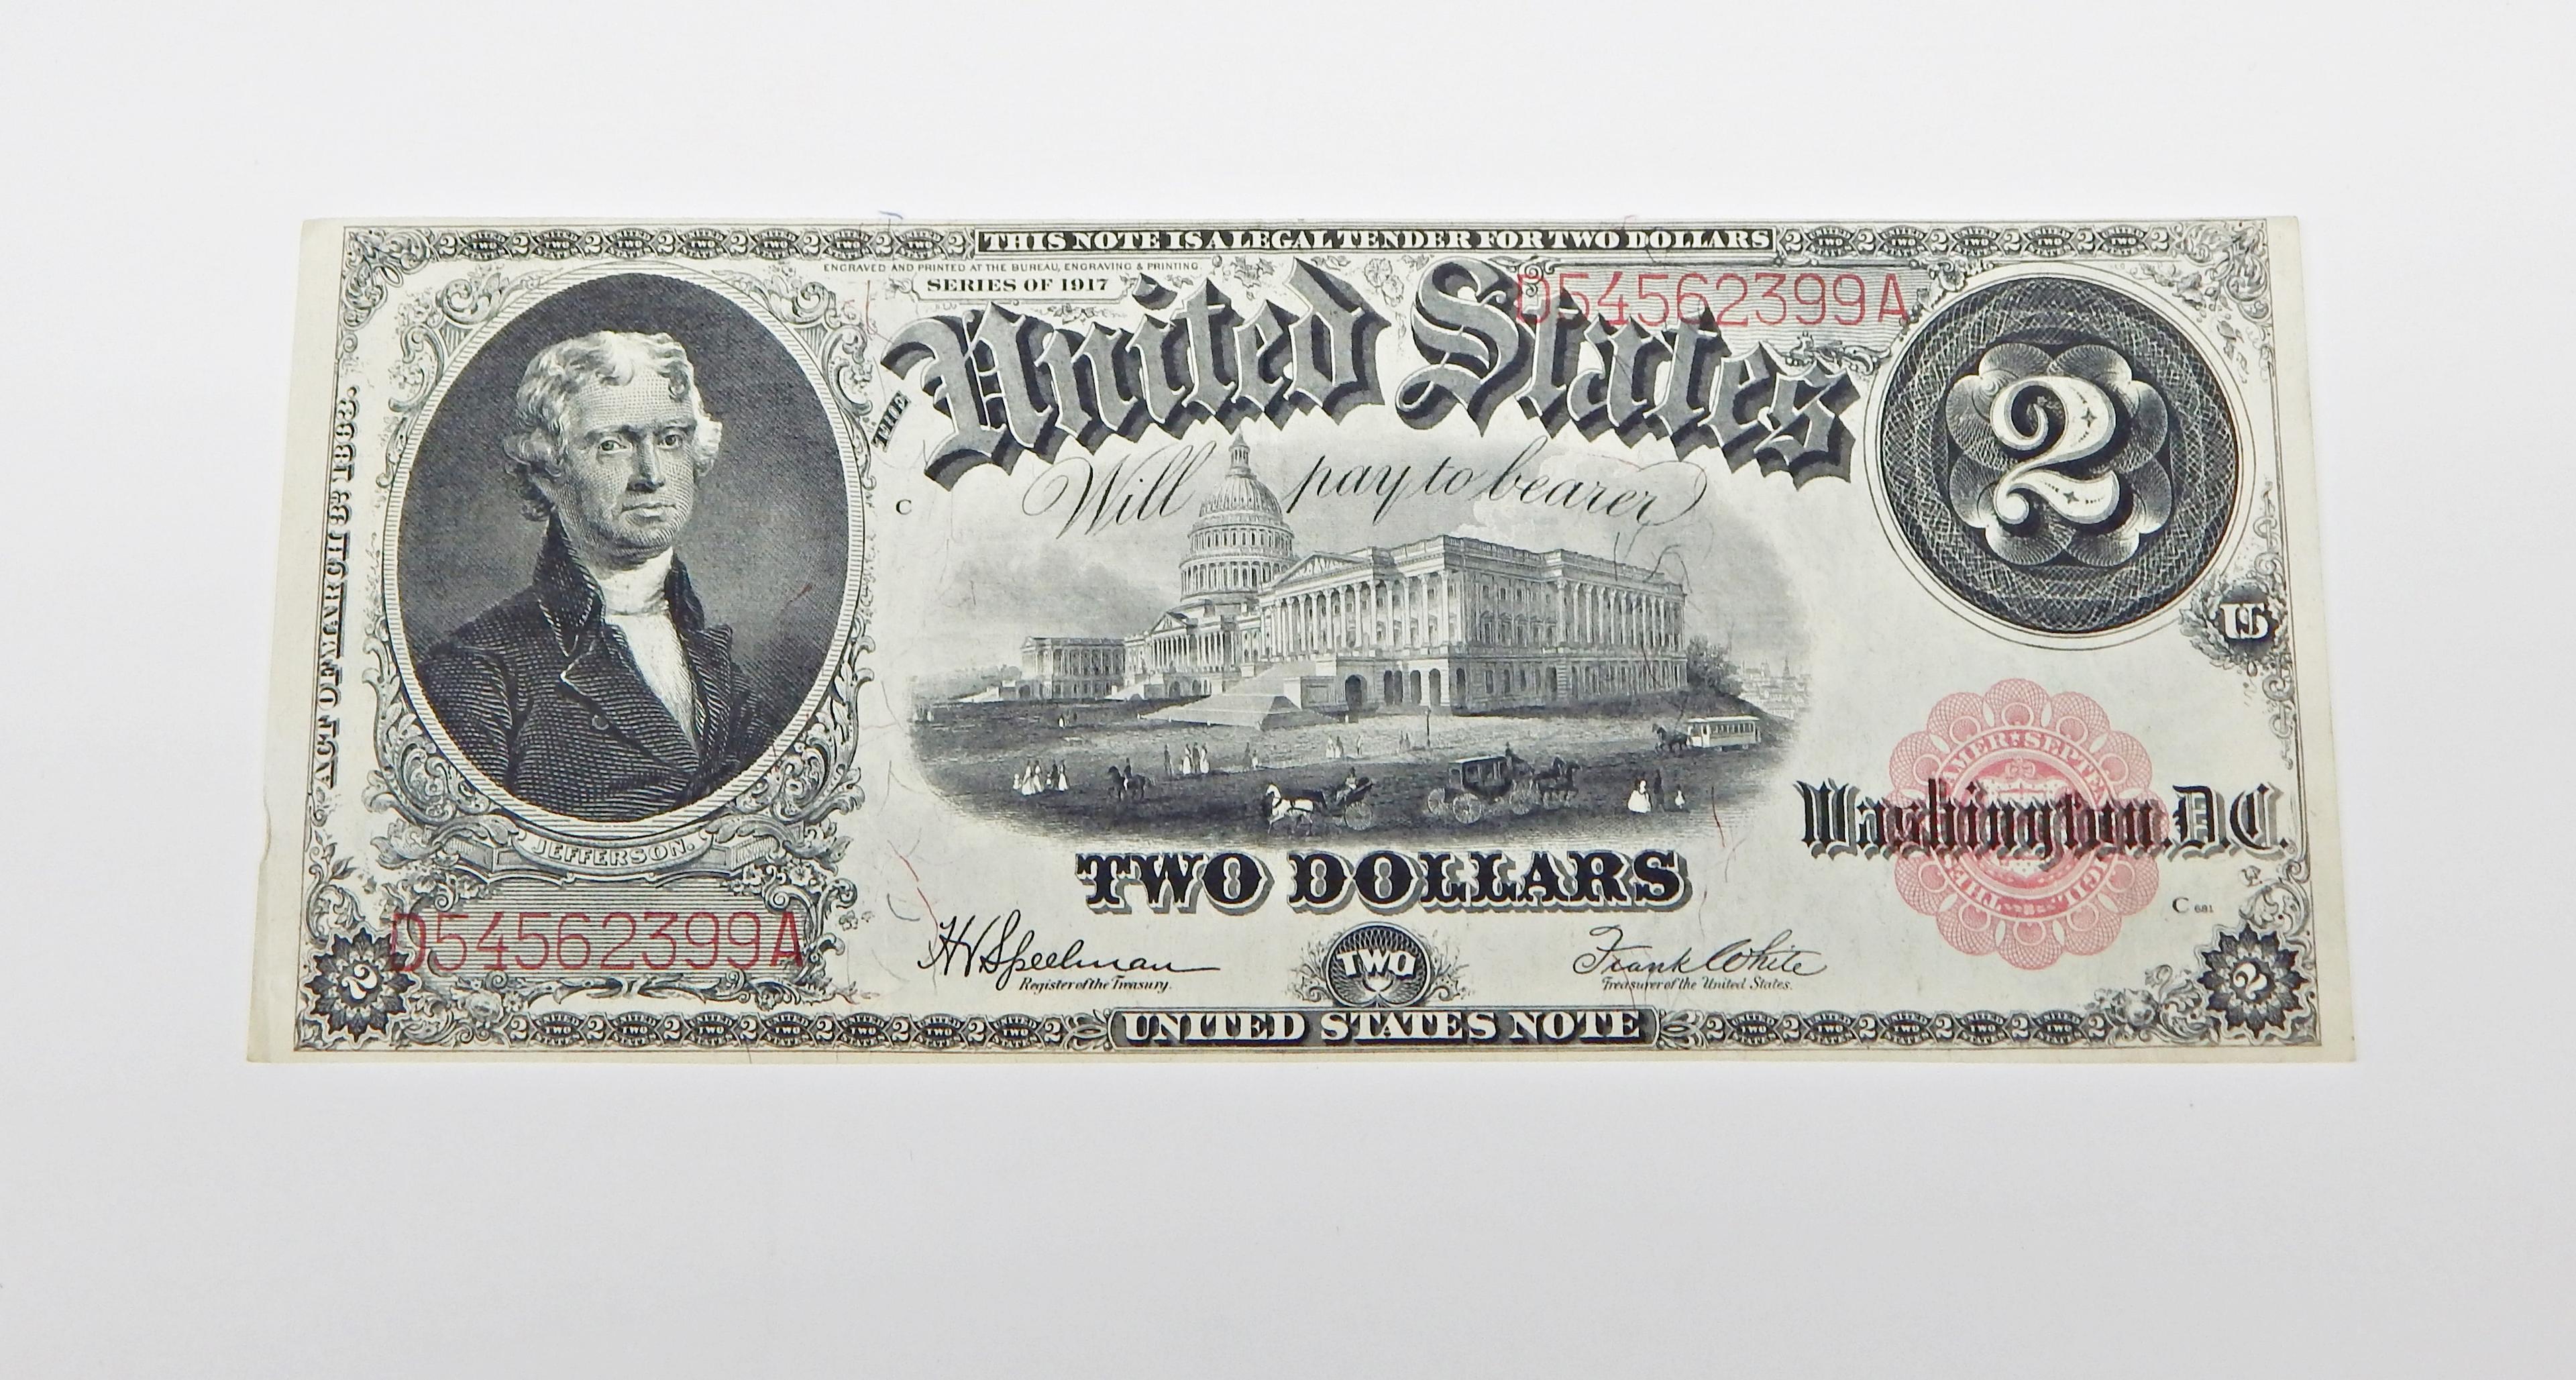 1917 $2 UNITED STATES NOTE